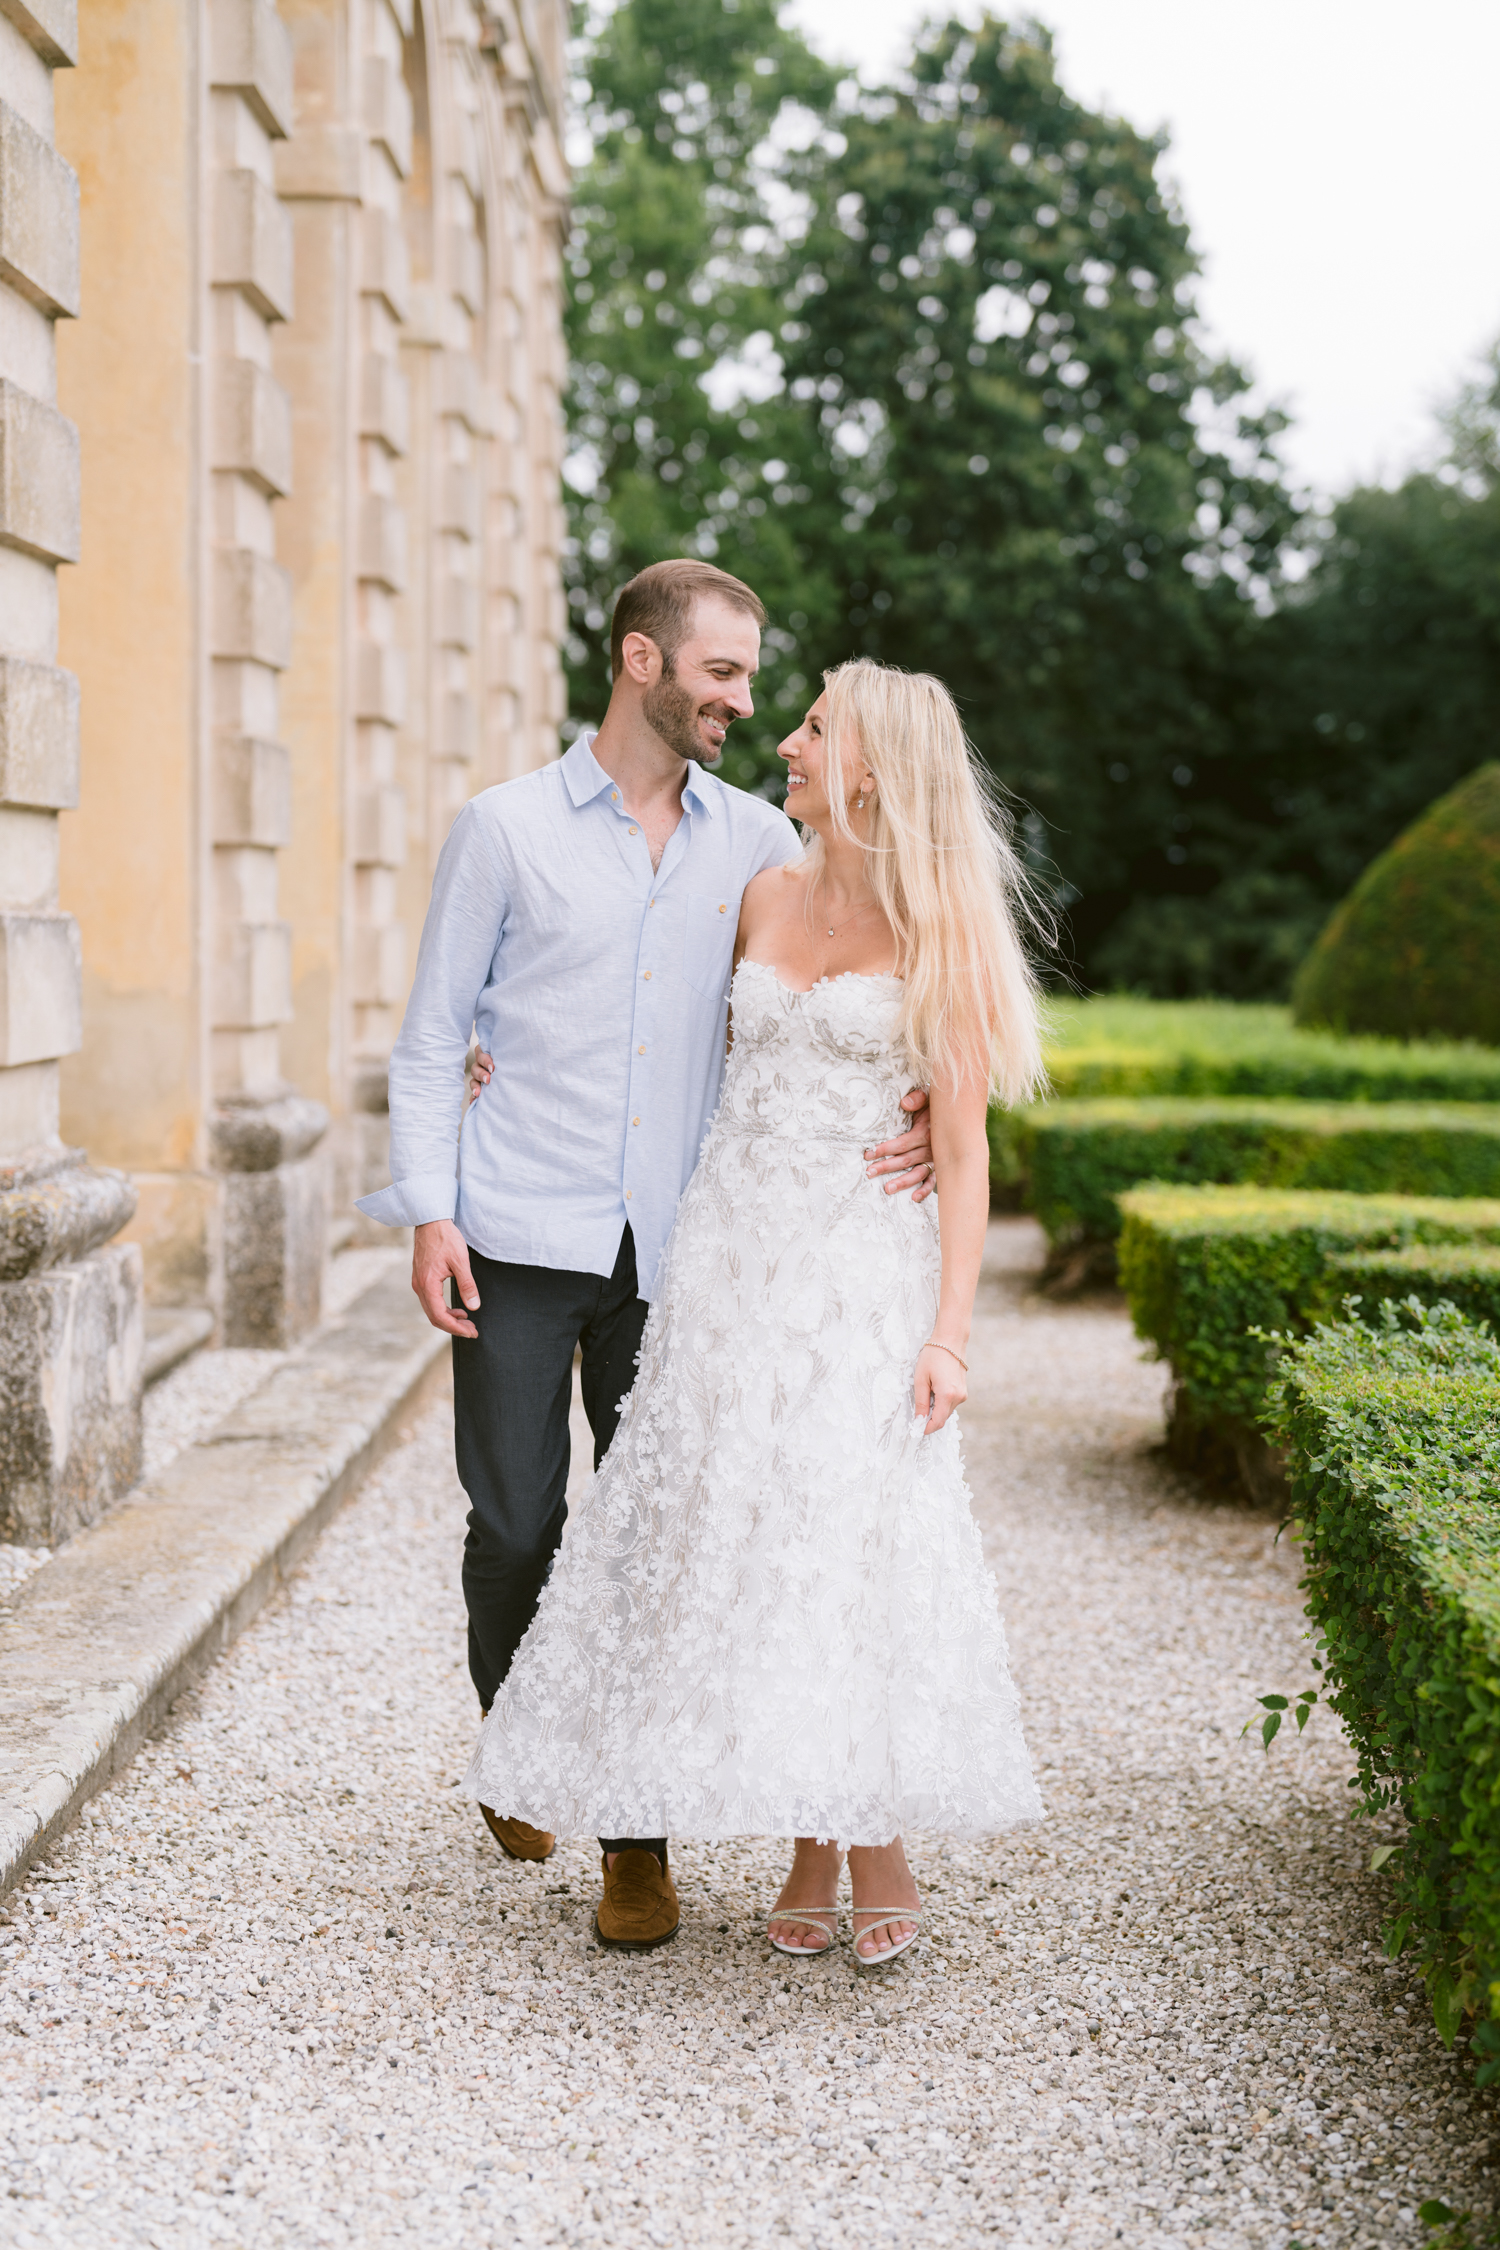 engagement photoshoot at Villa Emo Capodilista by a wedding photographer based in Padova, Italy